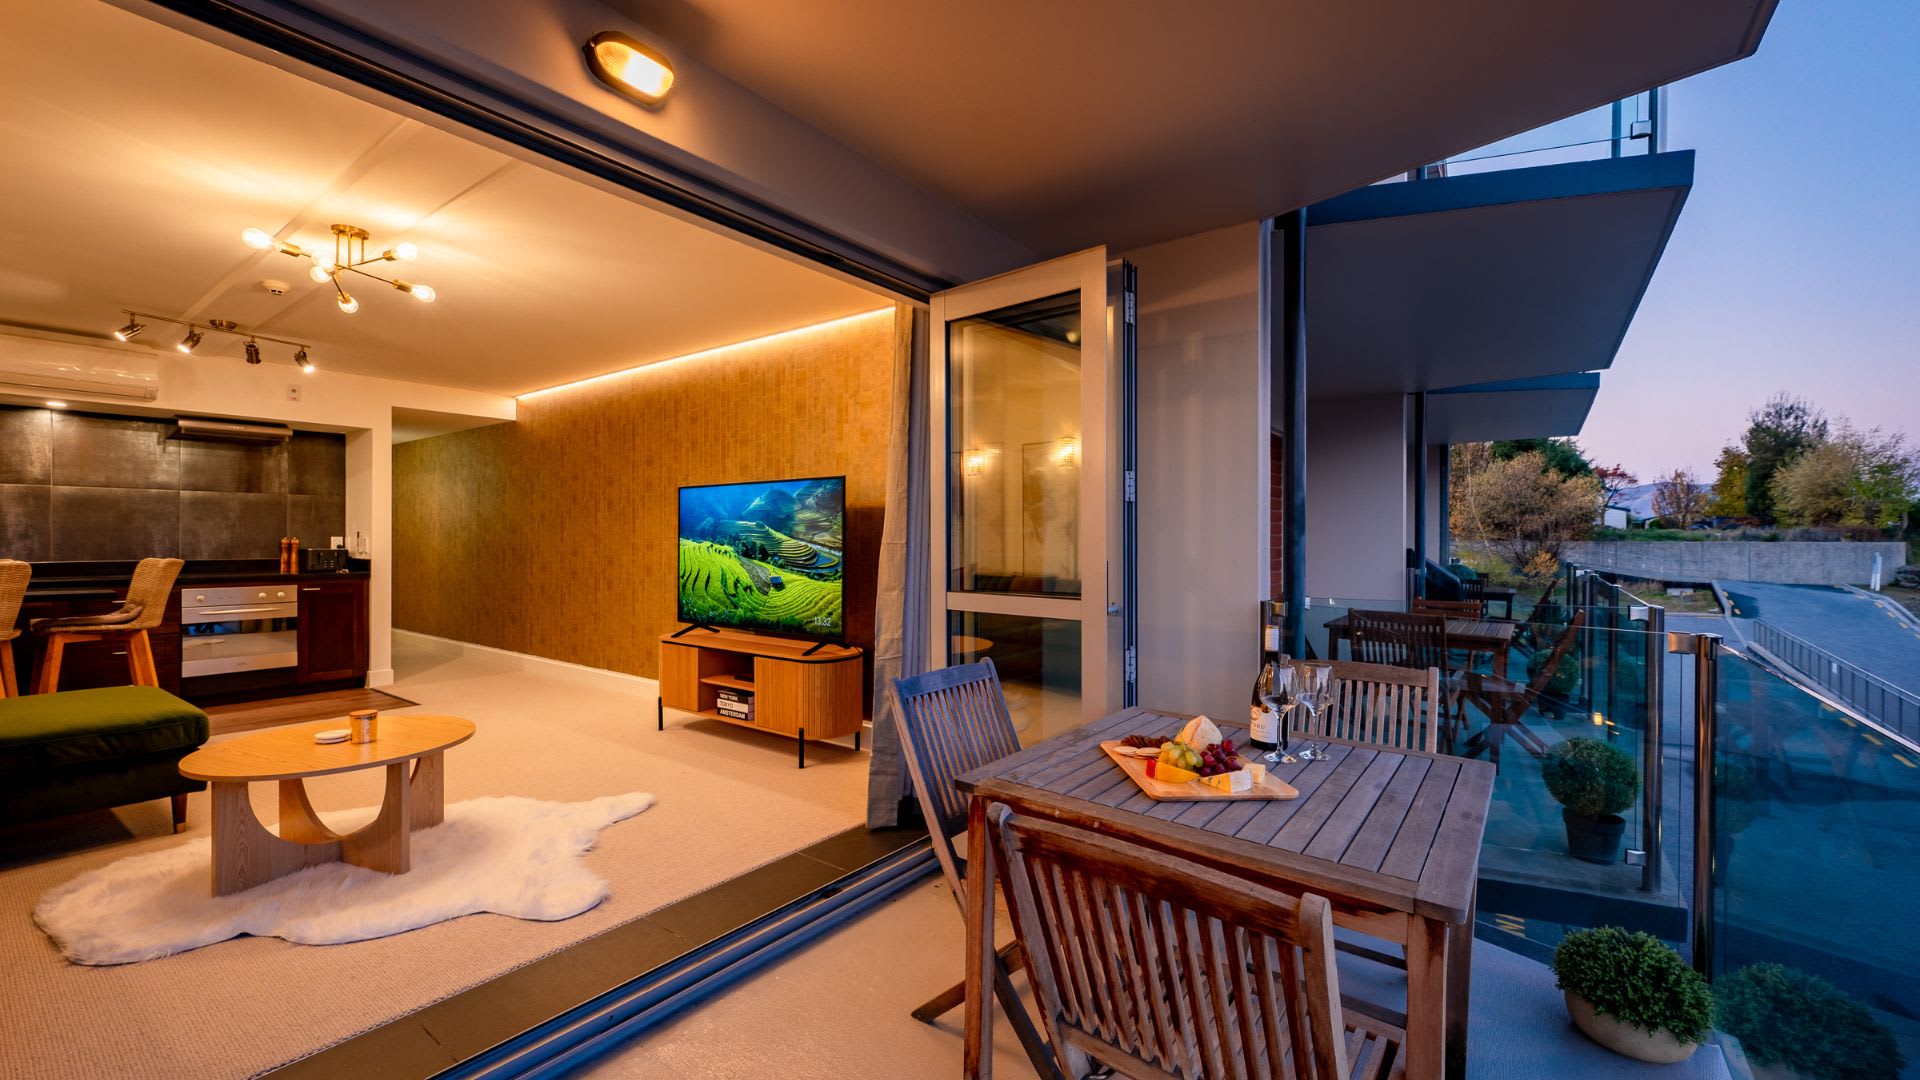 Enjoy a serene dusk on the integrated balcony and lounge when you stay here